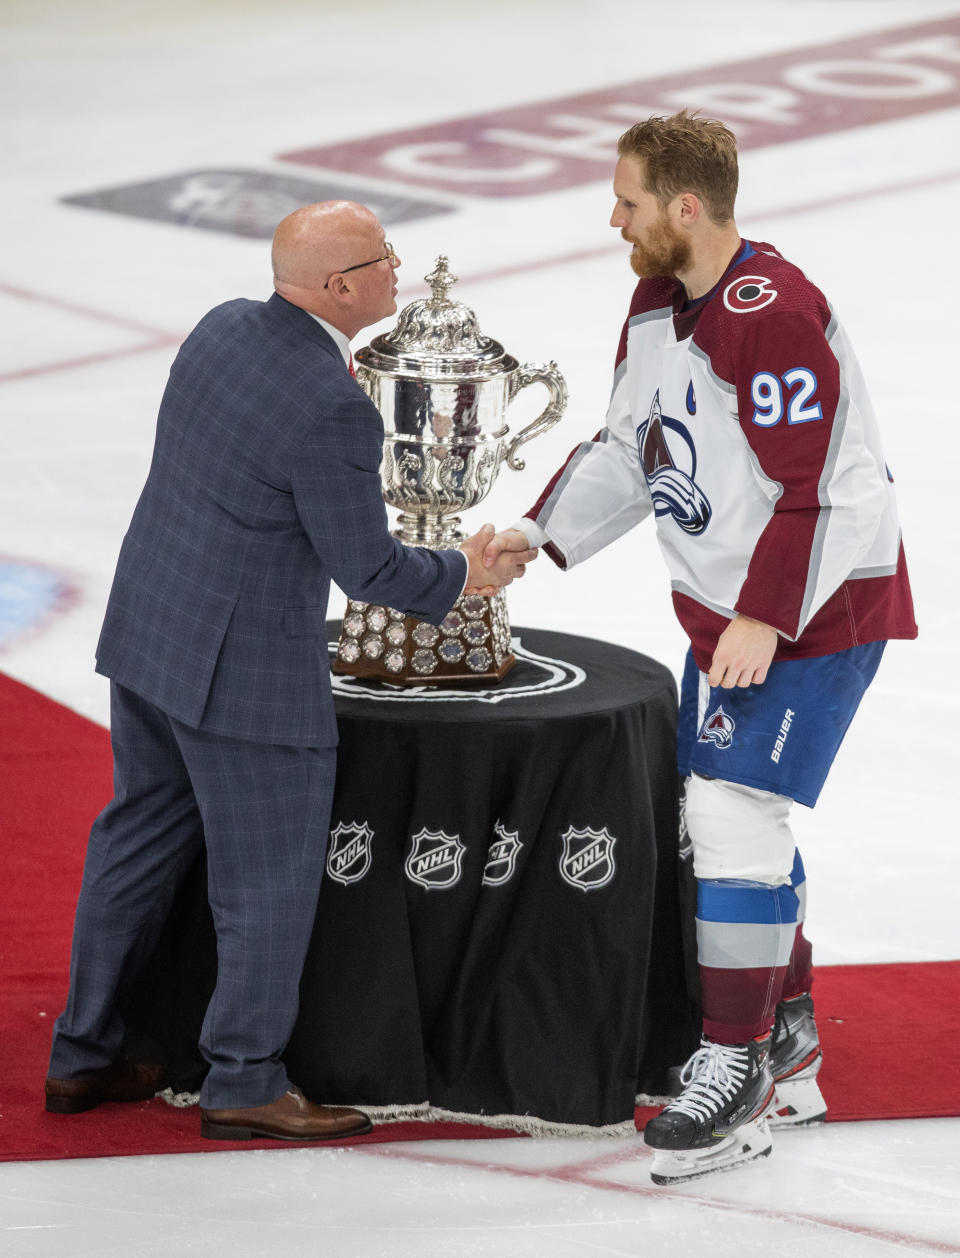 Colorado Avalanche's Gabriel Landeskog (92) is presented the Campbell Conference Bowl from Bill Daley, Deputy Commissioner, after defeating the Edmonton Oilers during overtime NHL hockey conference finals action in Edmonton, Alberta, on Monday, June 6, 2022. The Avalanche won the game 6-5, to take the series. (Amber Bracken/The Canadian Press via AP)